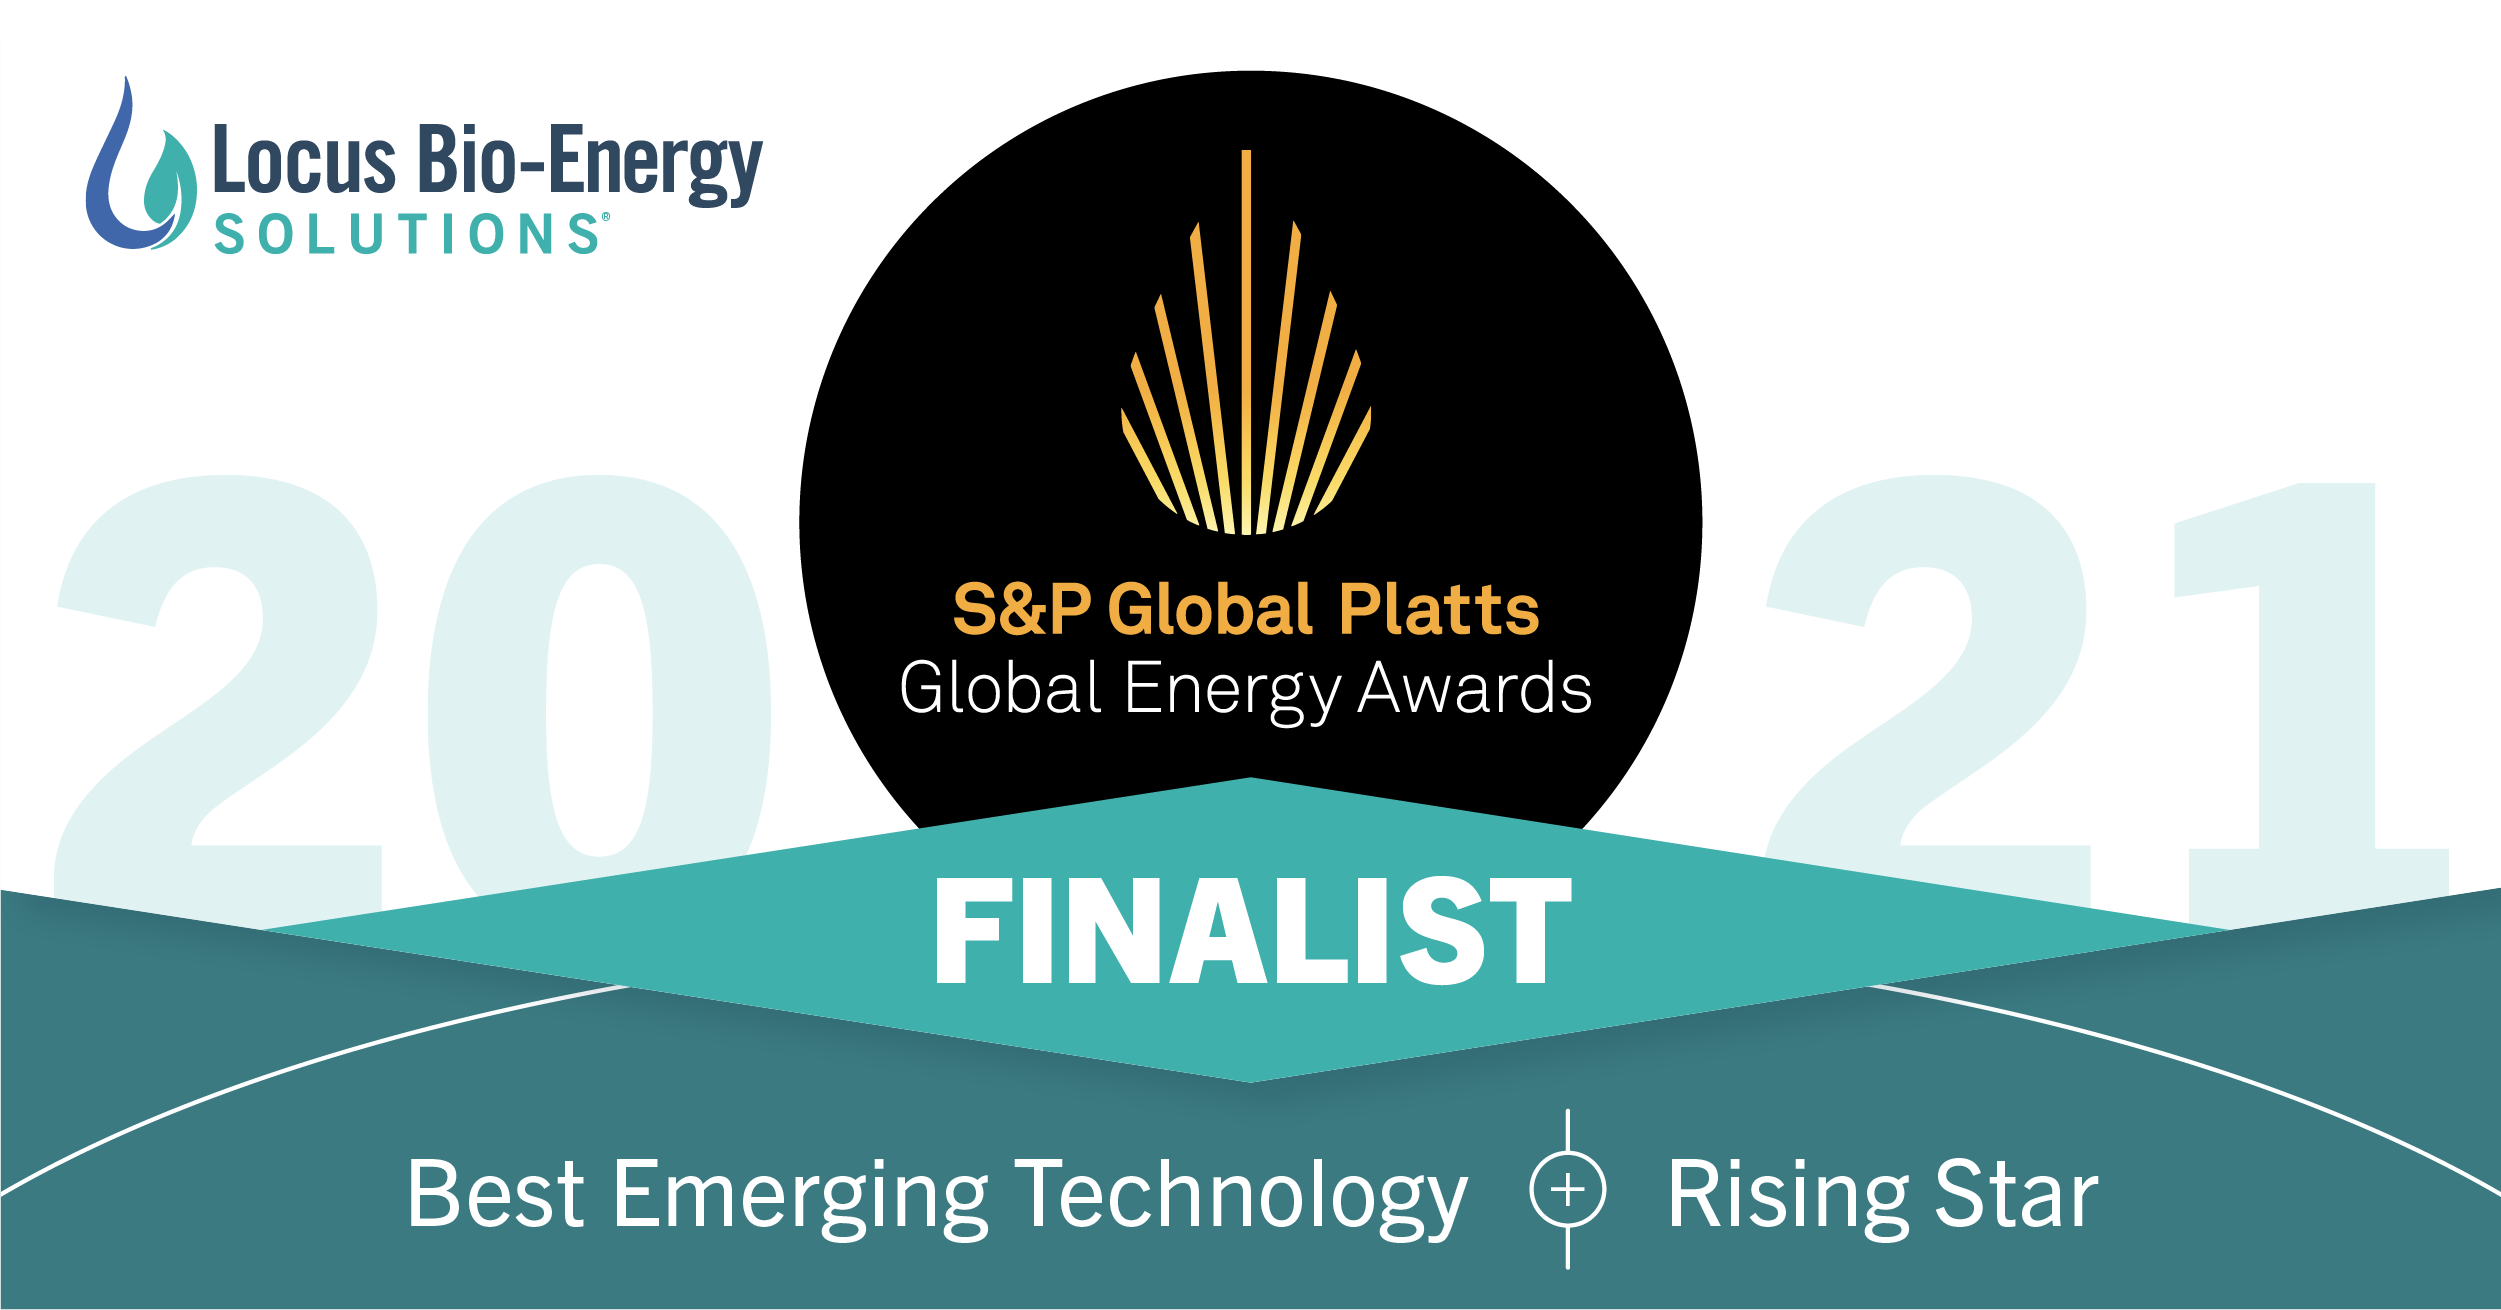 S&P Global Names Locus Bio-Energy Solutions One of the Rising Stars in the Oilfield with Emerging Technology for Shale Production Boost